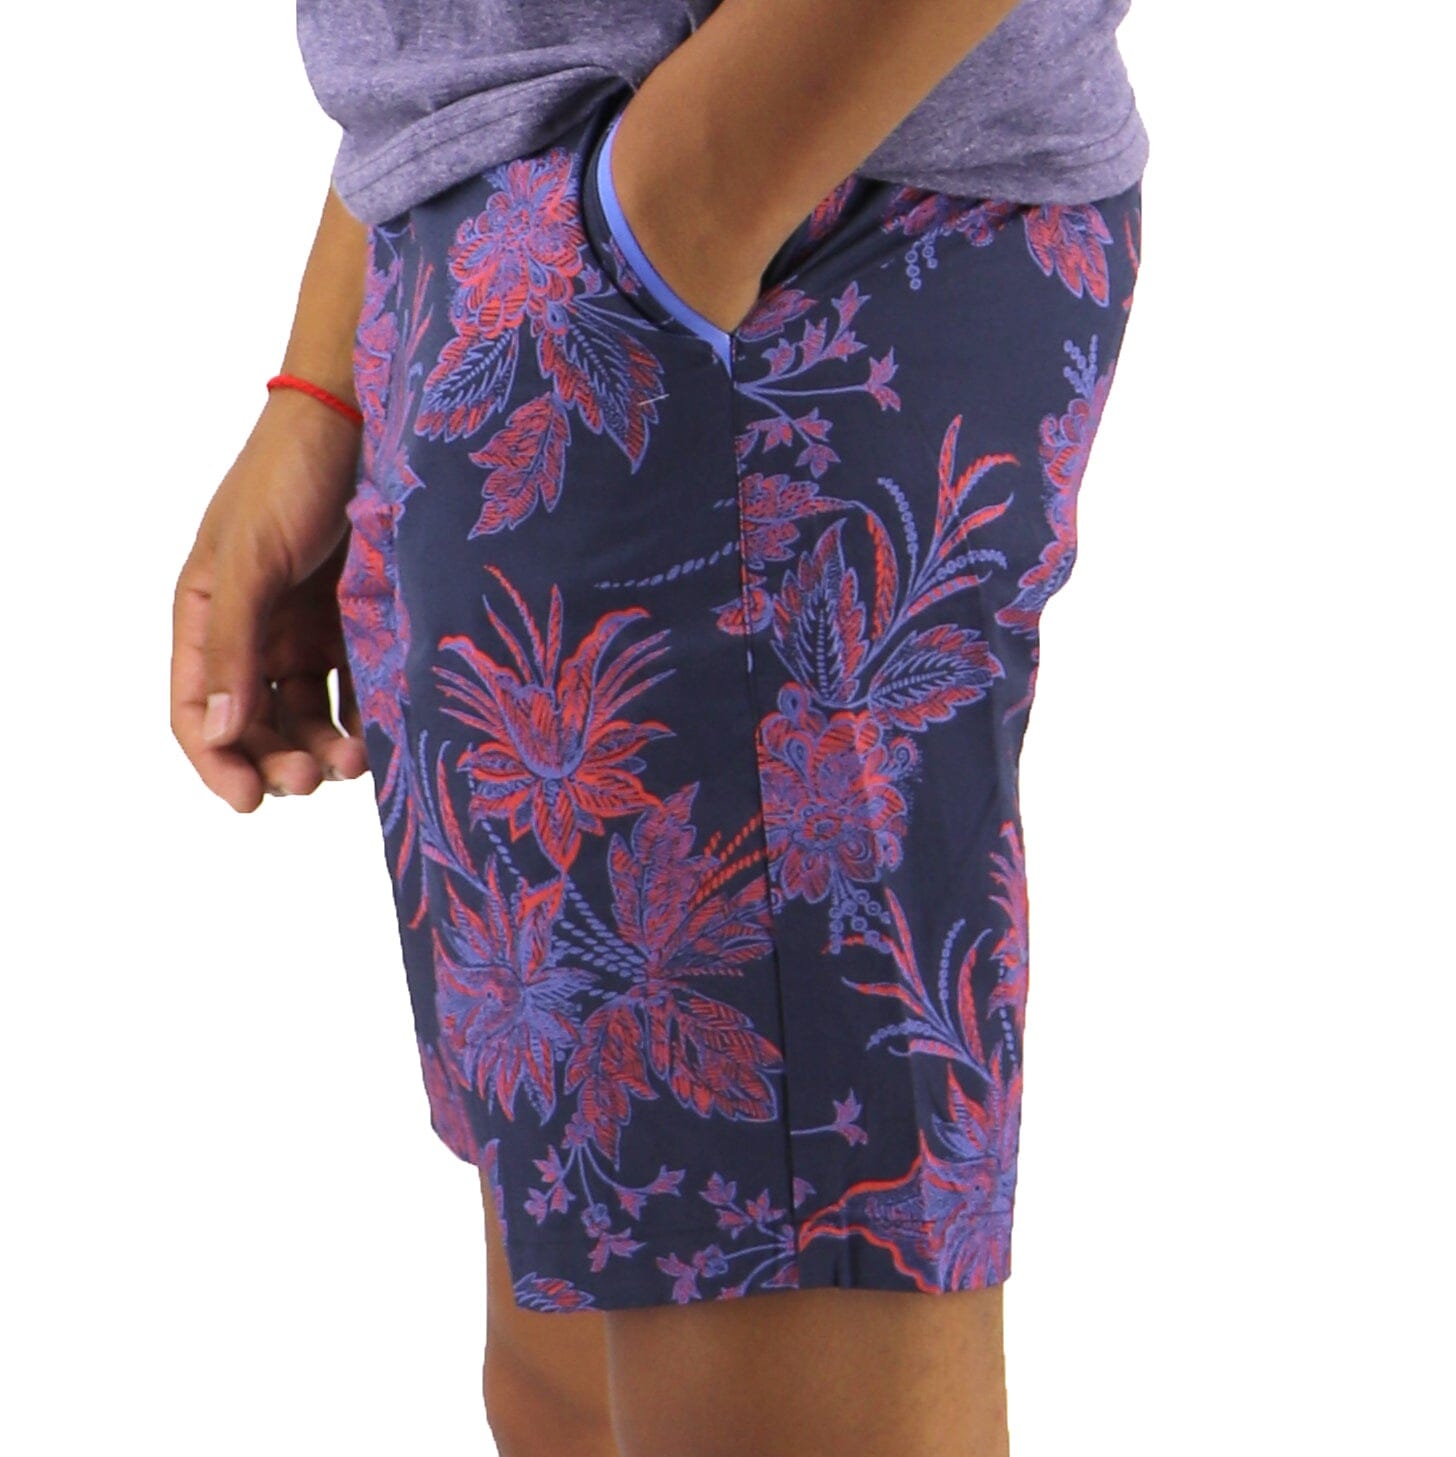 Red And Blue Shorts For Men. Buy Mens Floral Shorts Online